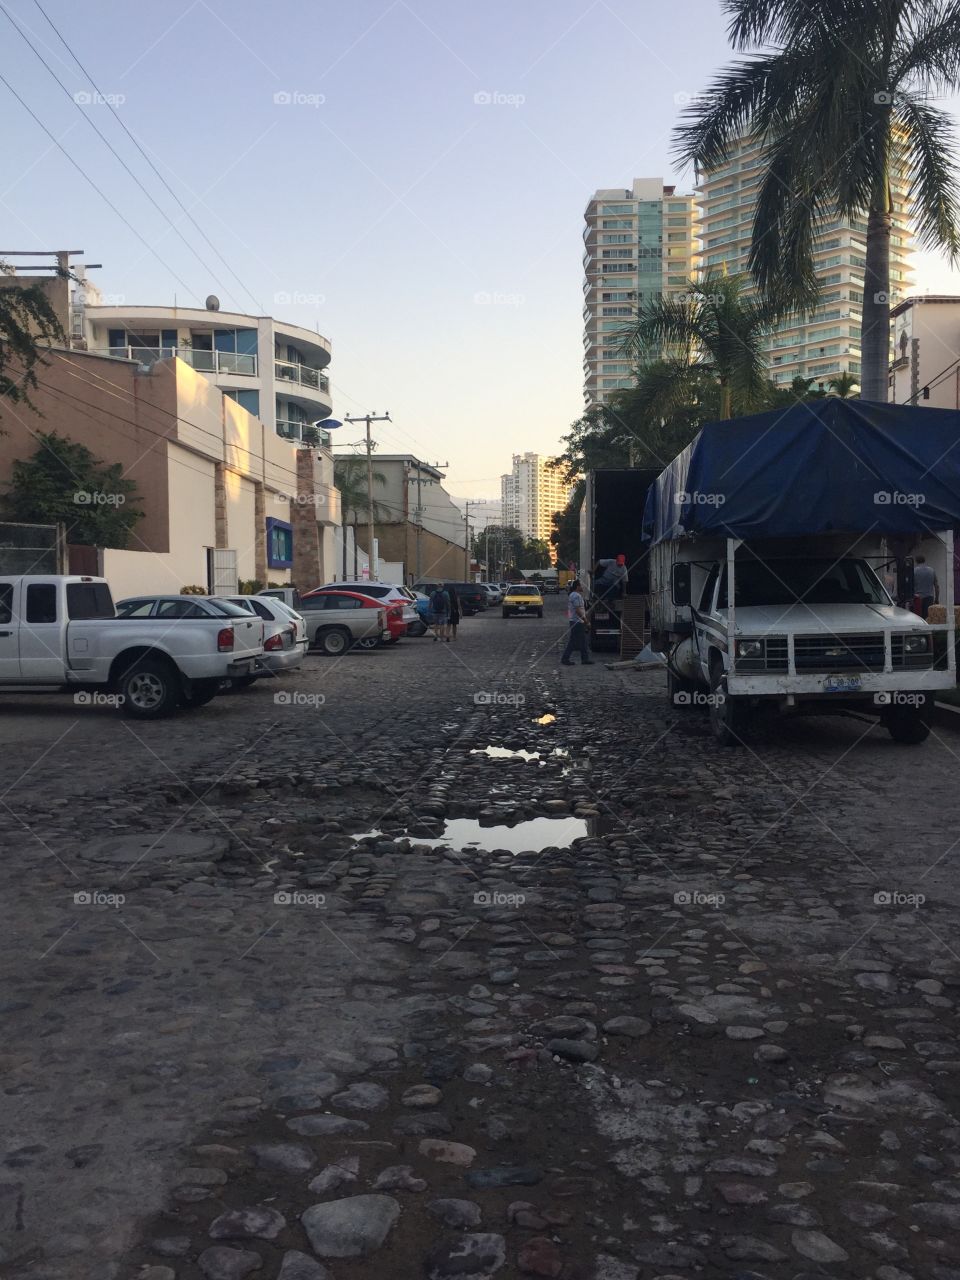 Old cobblestone Road in Puerto Vallarta in the Mexican Riviera with puddles in the middle, cars on the side of the street, and tall, luxury hotels in the distance